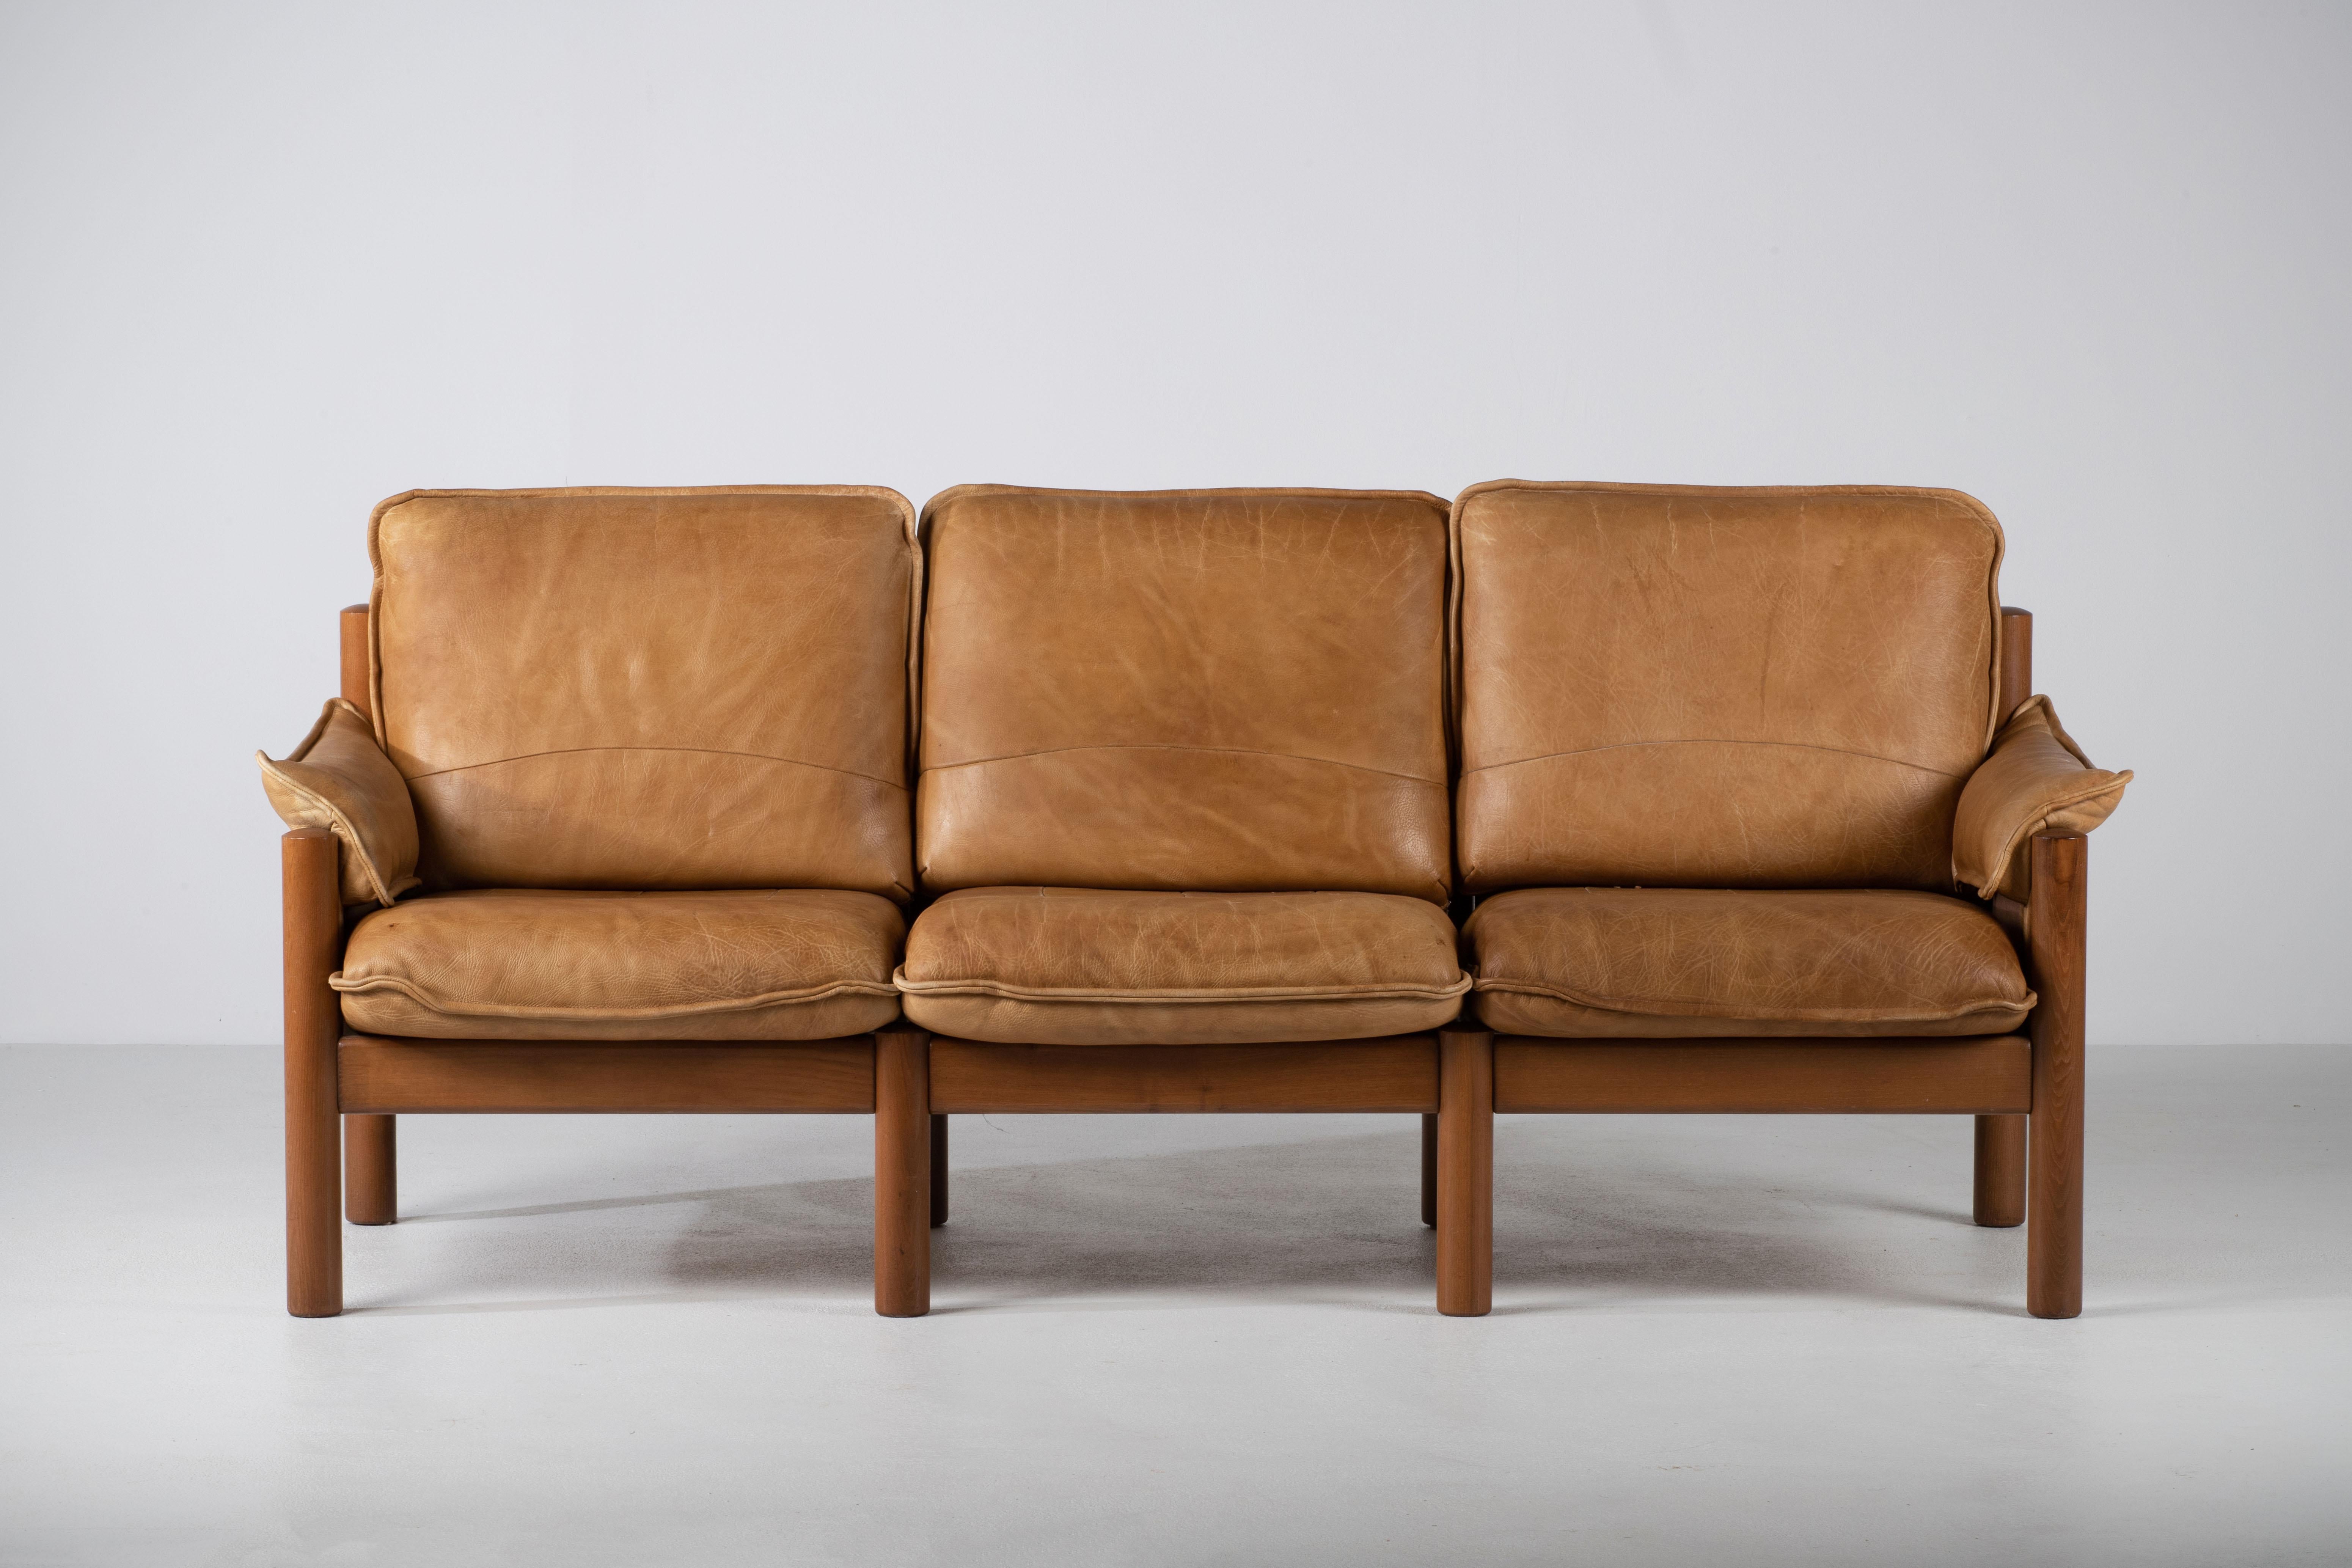 Mid-century three seats sofa in a brown leather.
Good vintage condition with minor wear.
 